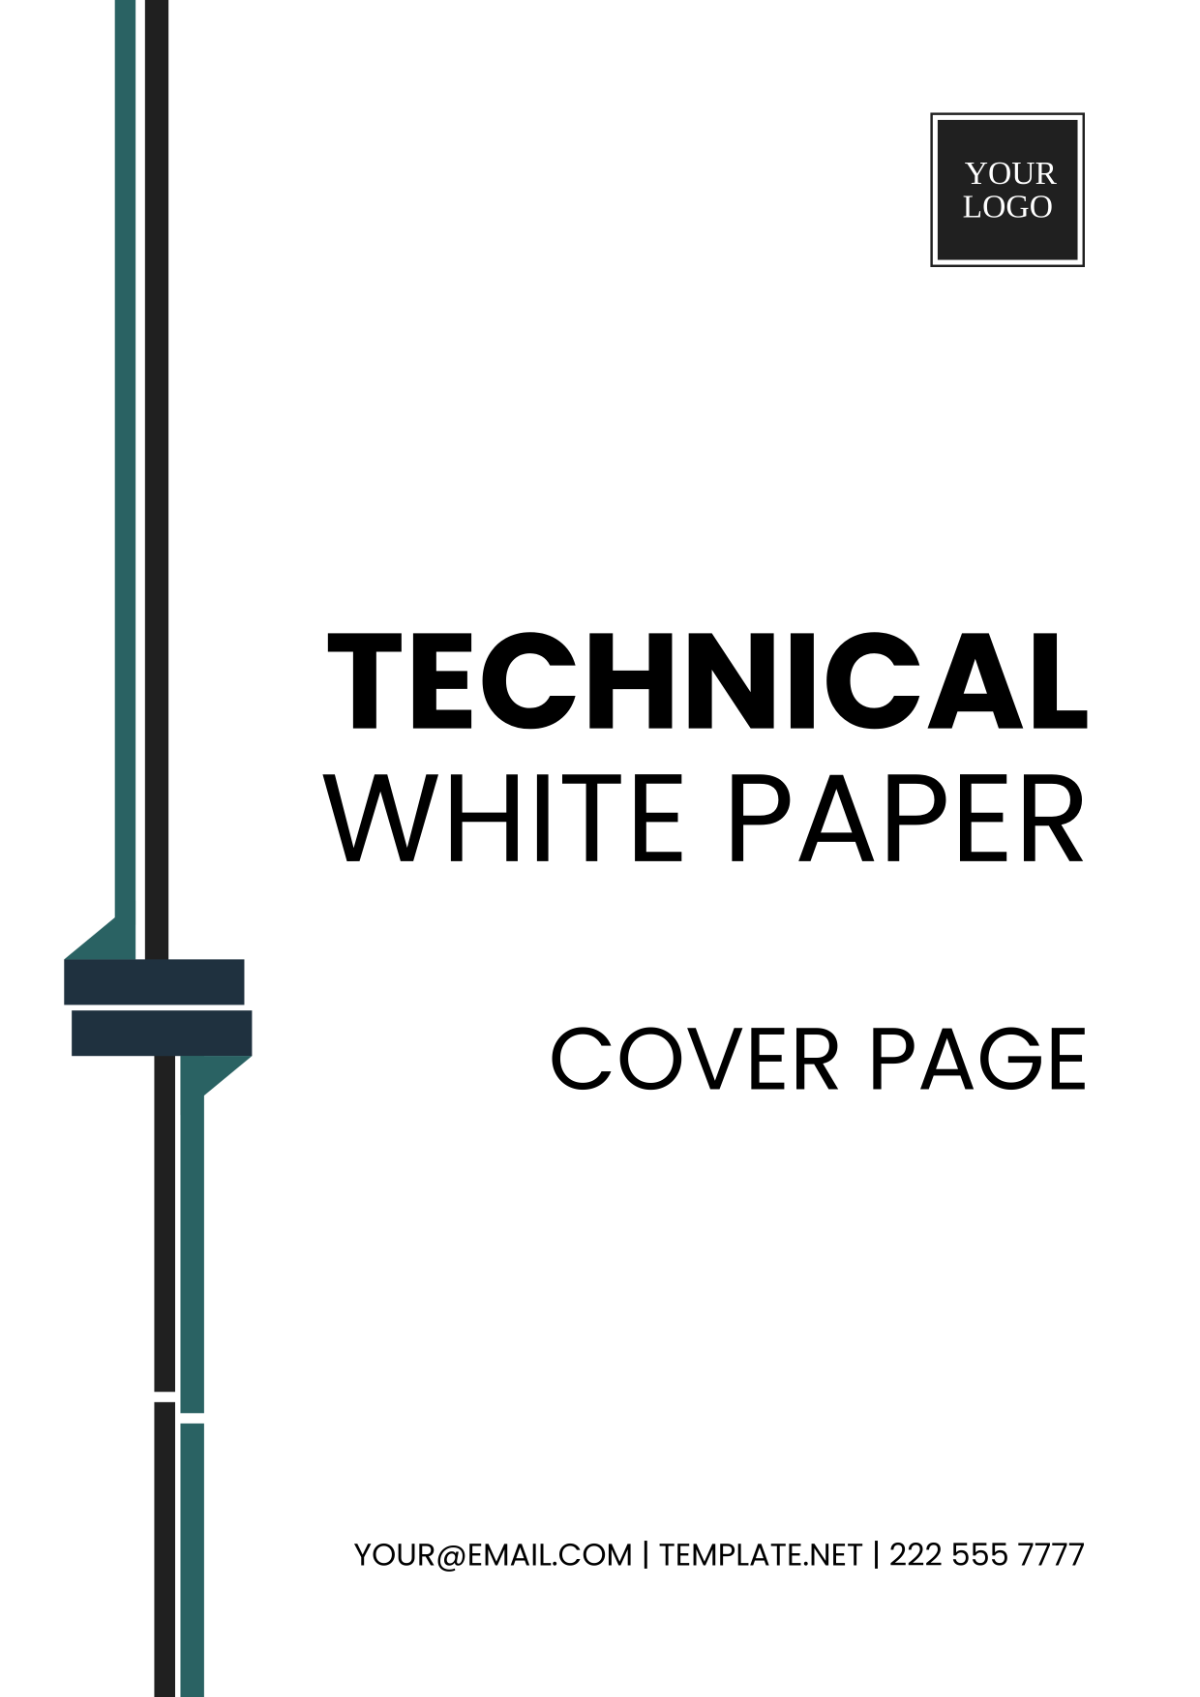 Technical White Paper Cover Page Template